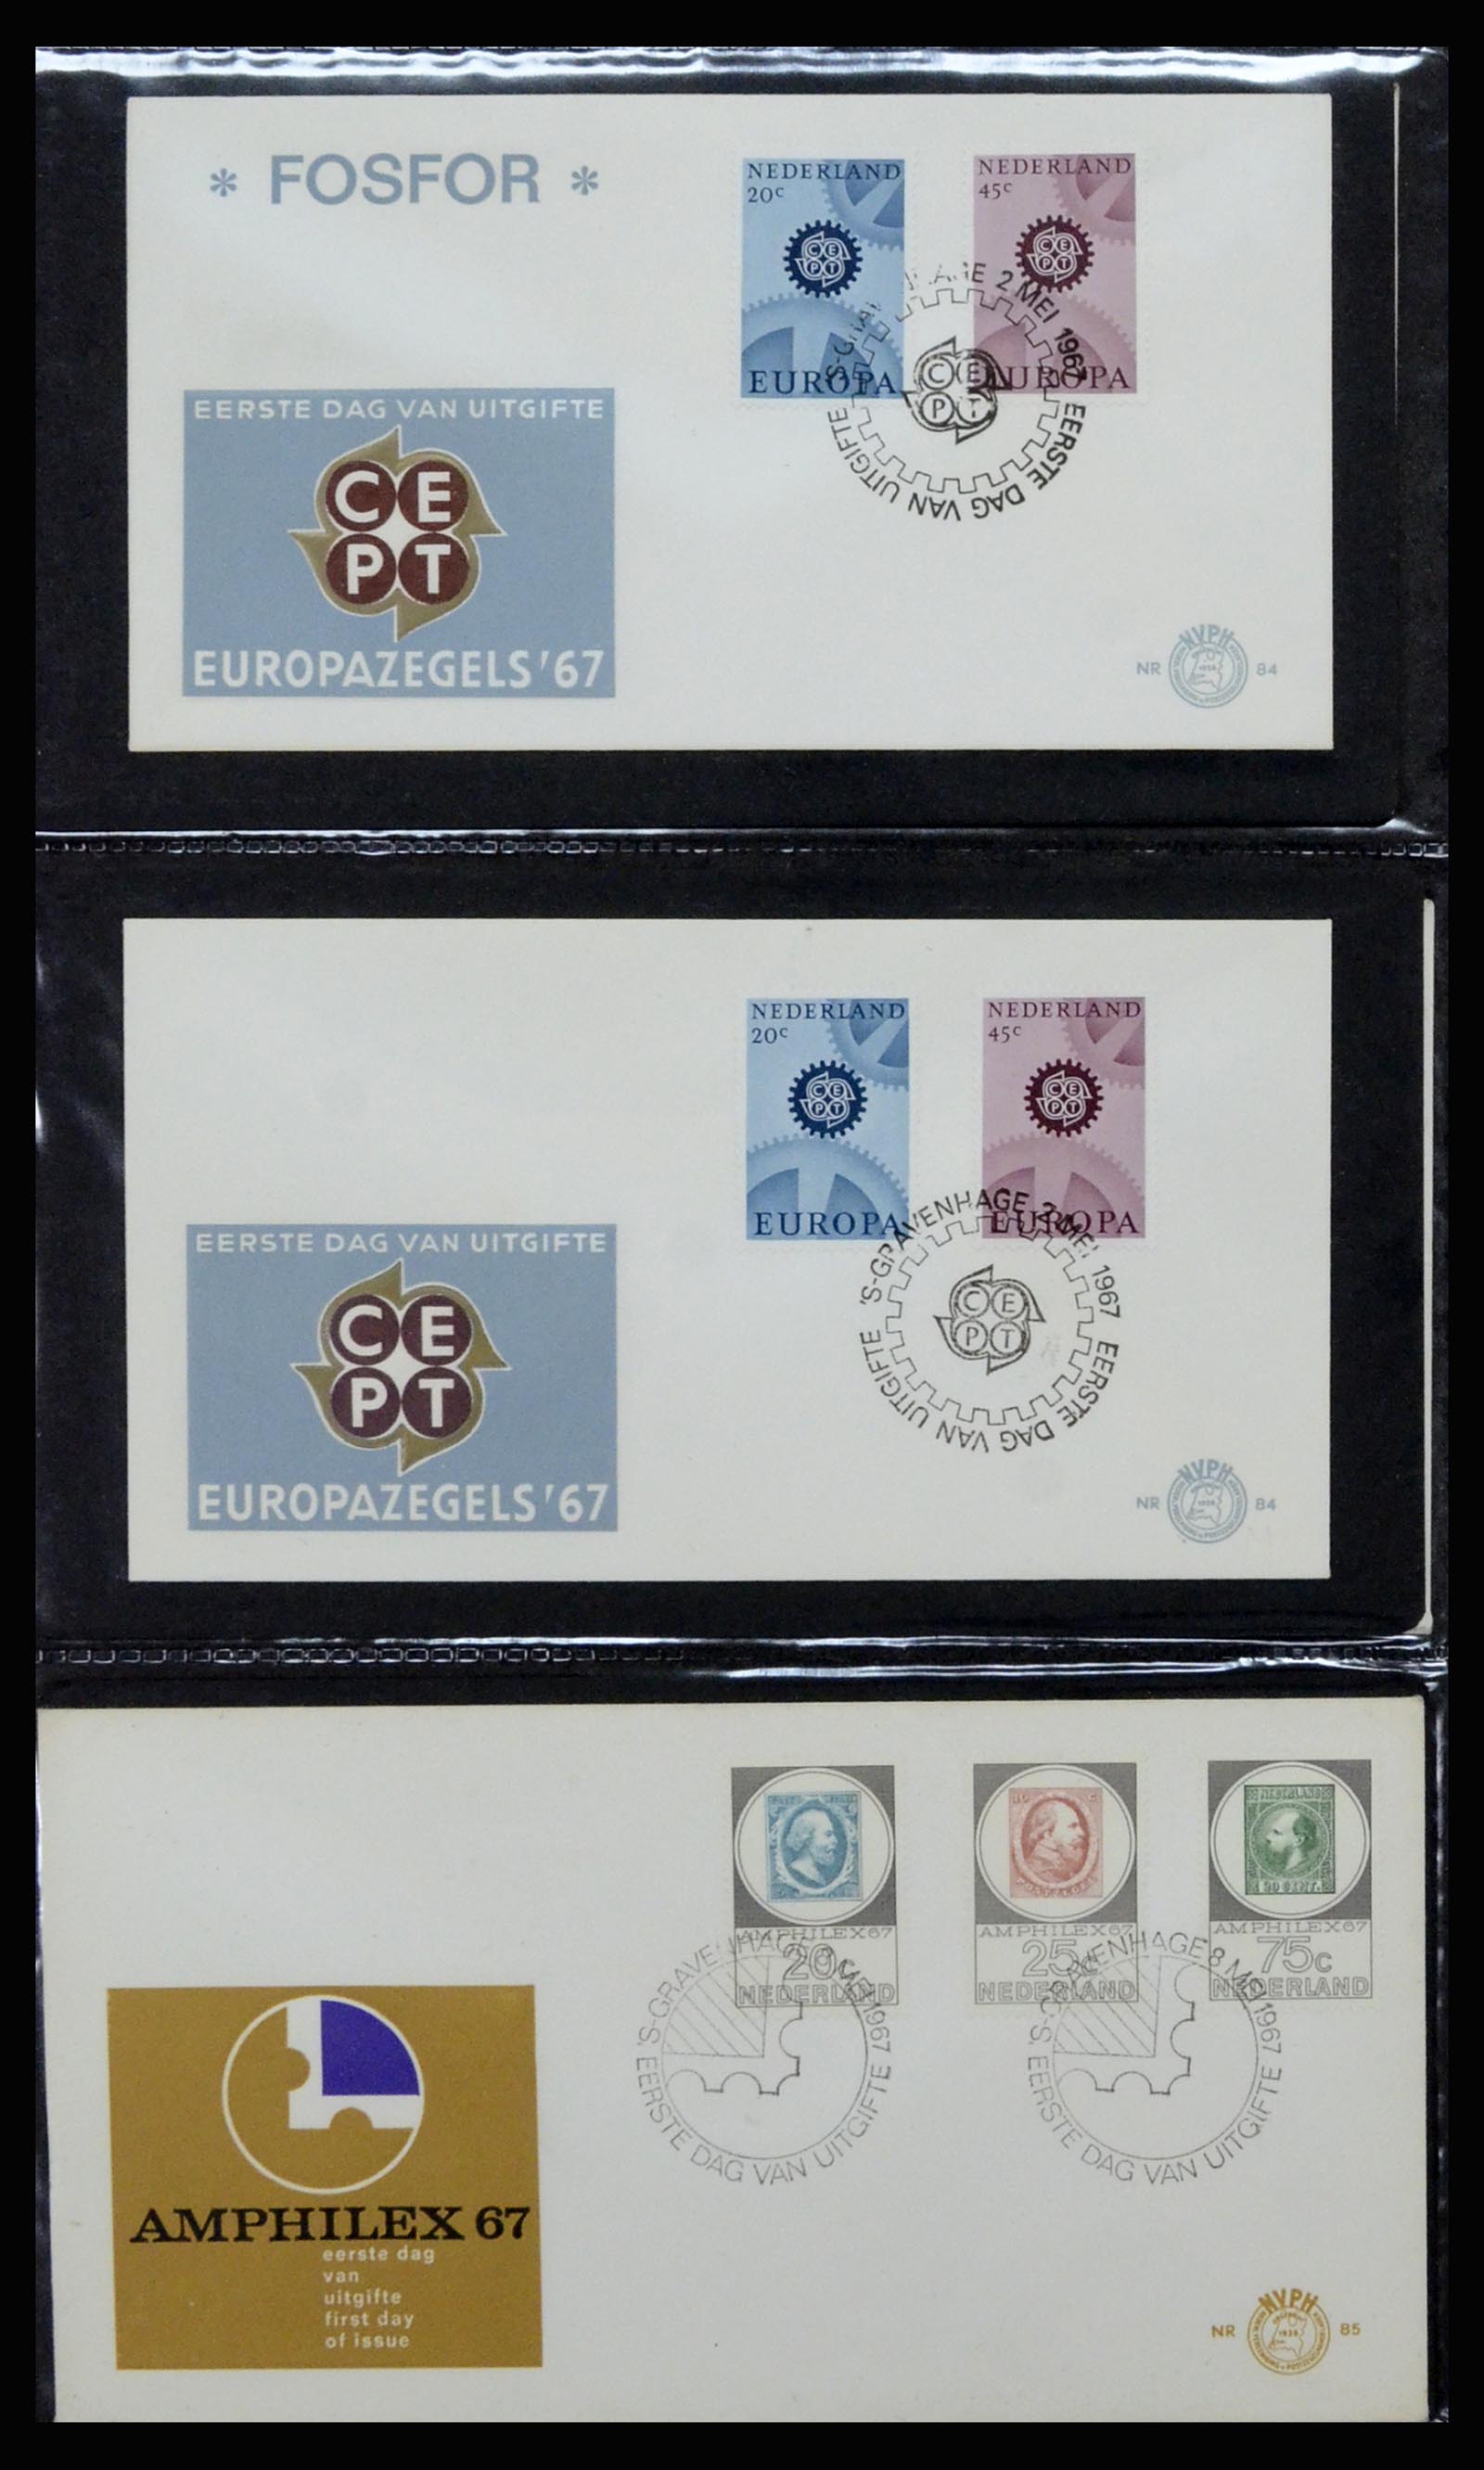 37197 030 - Stamp collection 37197 Netherlands FDC's 1950-2004.